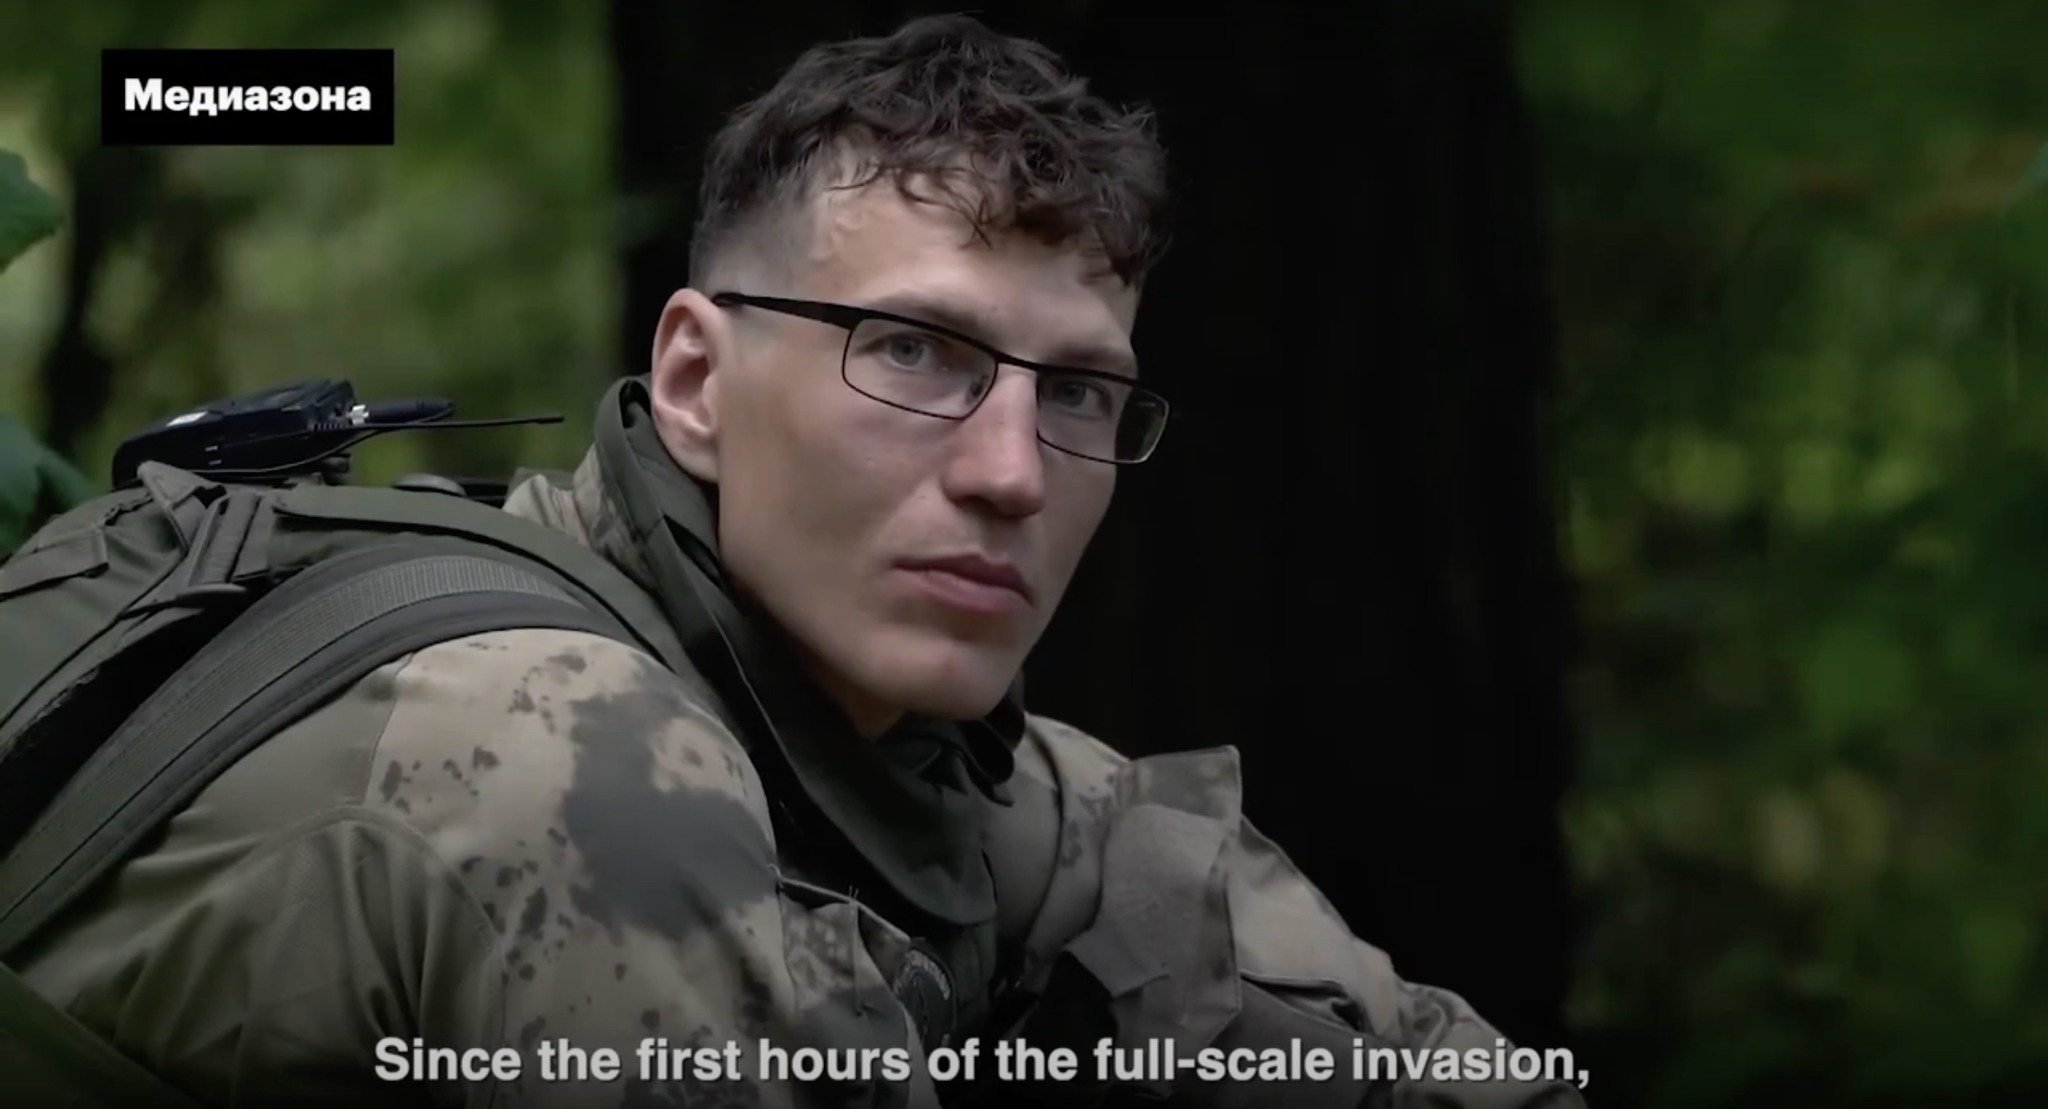 Russian anarchist fights alongside Ukrainian forces with hope of bringing revolution to Russia [Video]